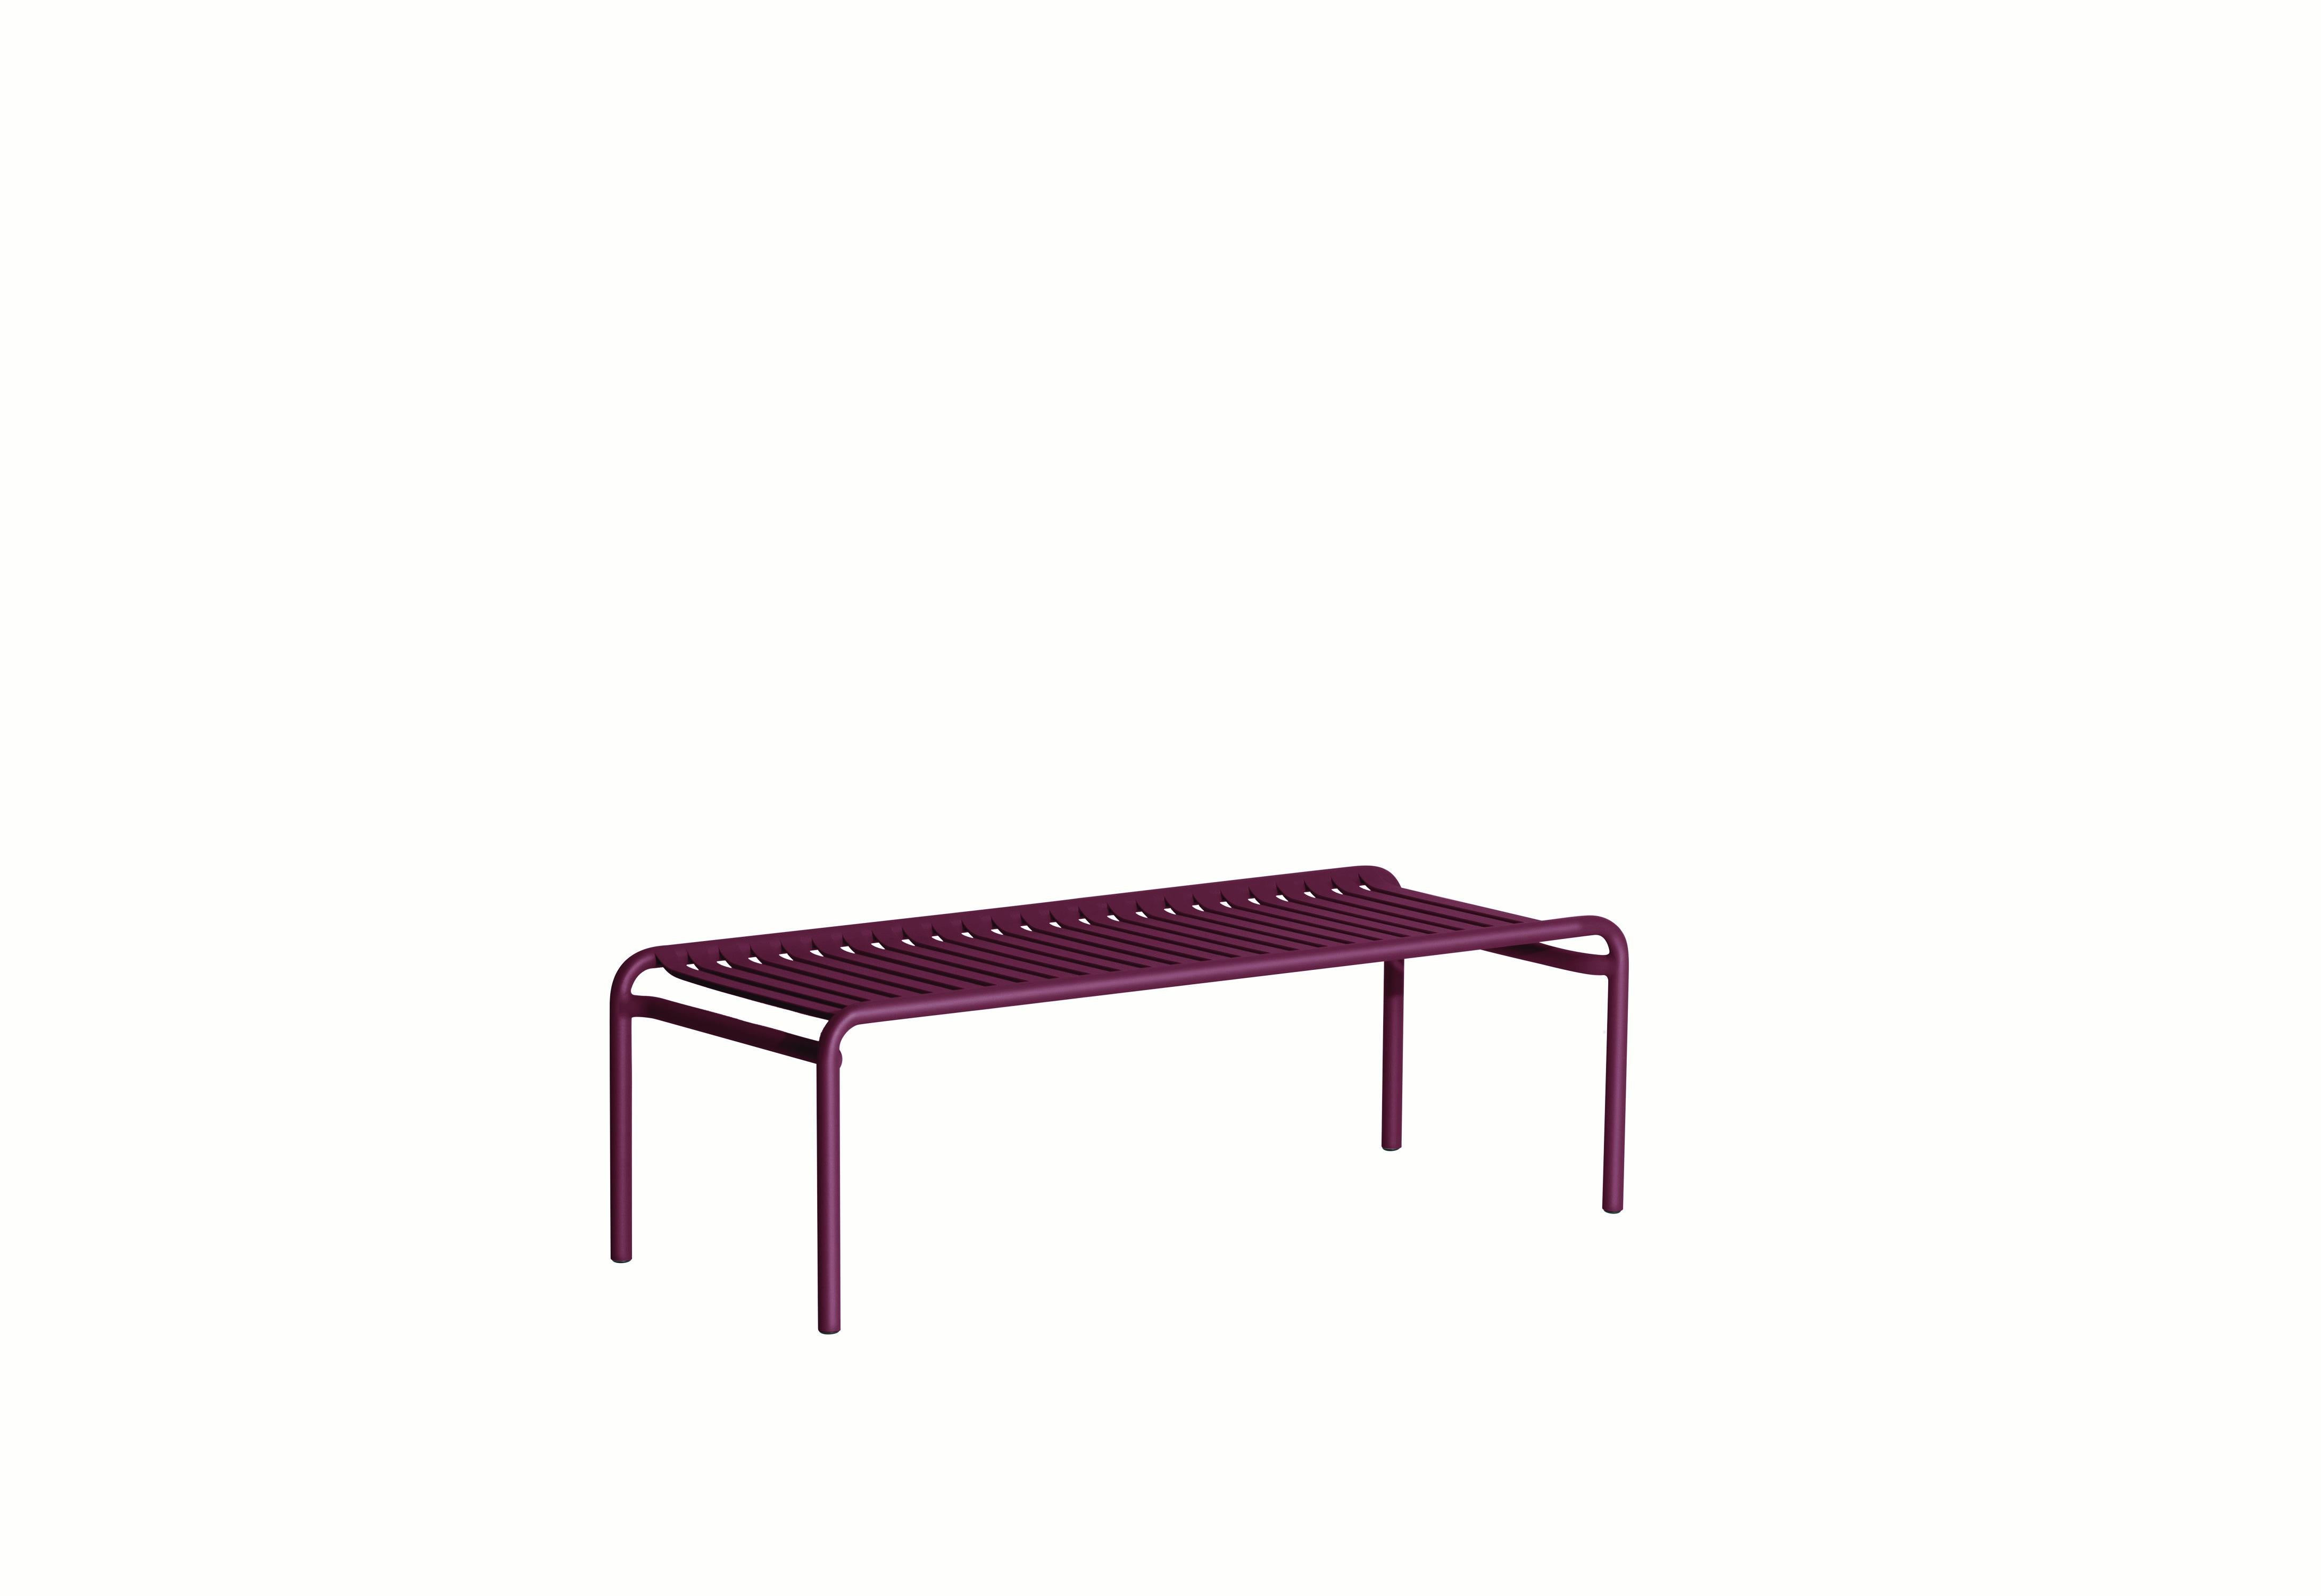 Petite Friture Week-End Long Coffee Table in Burgundy Aluminium by Studio BrichetZiegler, 2017

The week-end collection is a full range of outdoor furniture, in aluminium grained epoxy paint, matt finish, that includes 18 functions and 8 colours